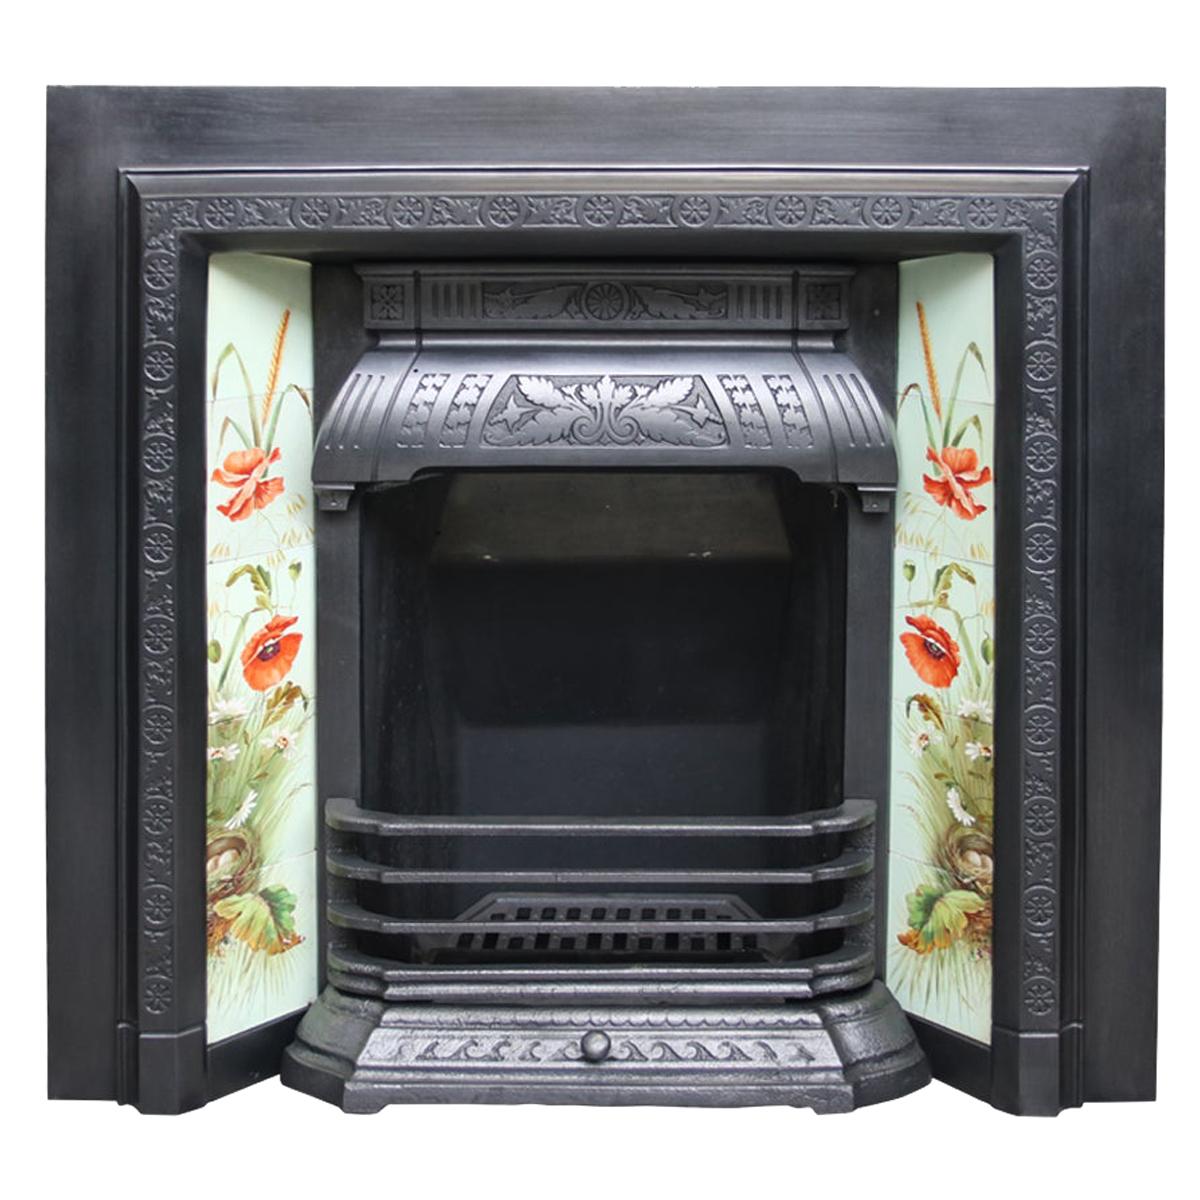 Large Reclaimed Victorian Cast Iron and Tiled Fireplace Insert